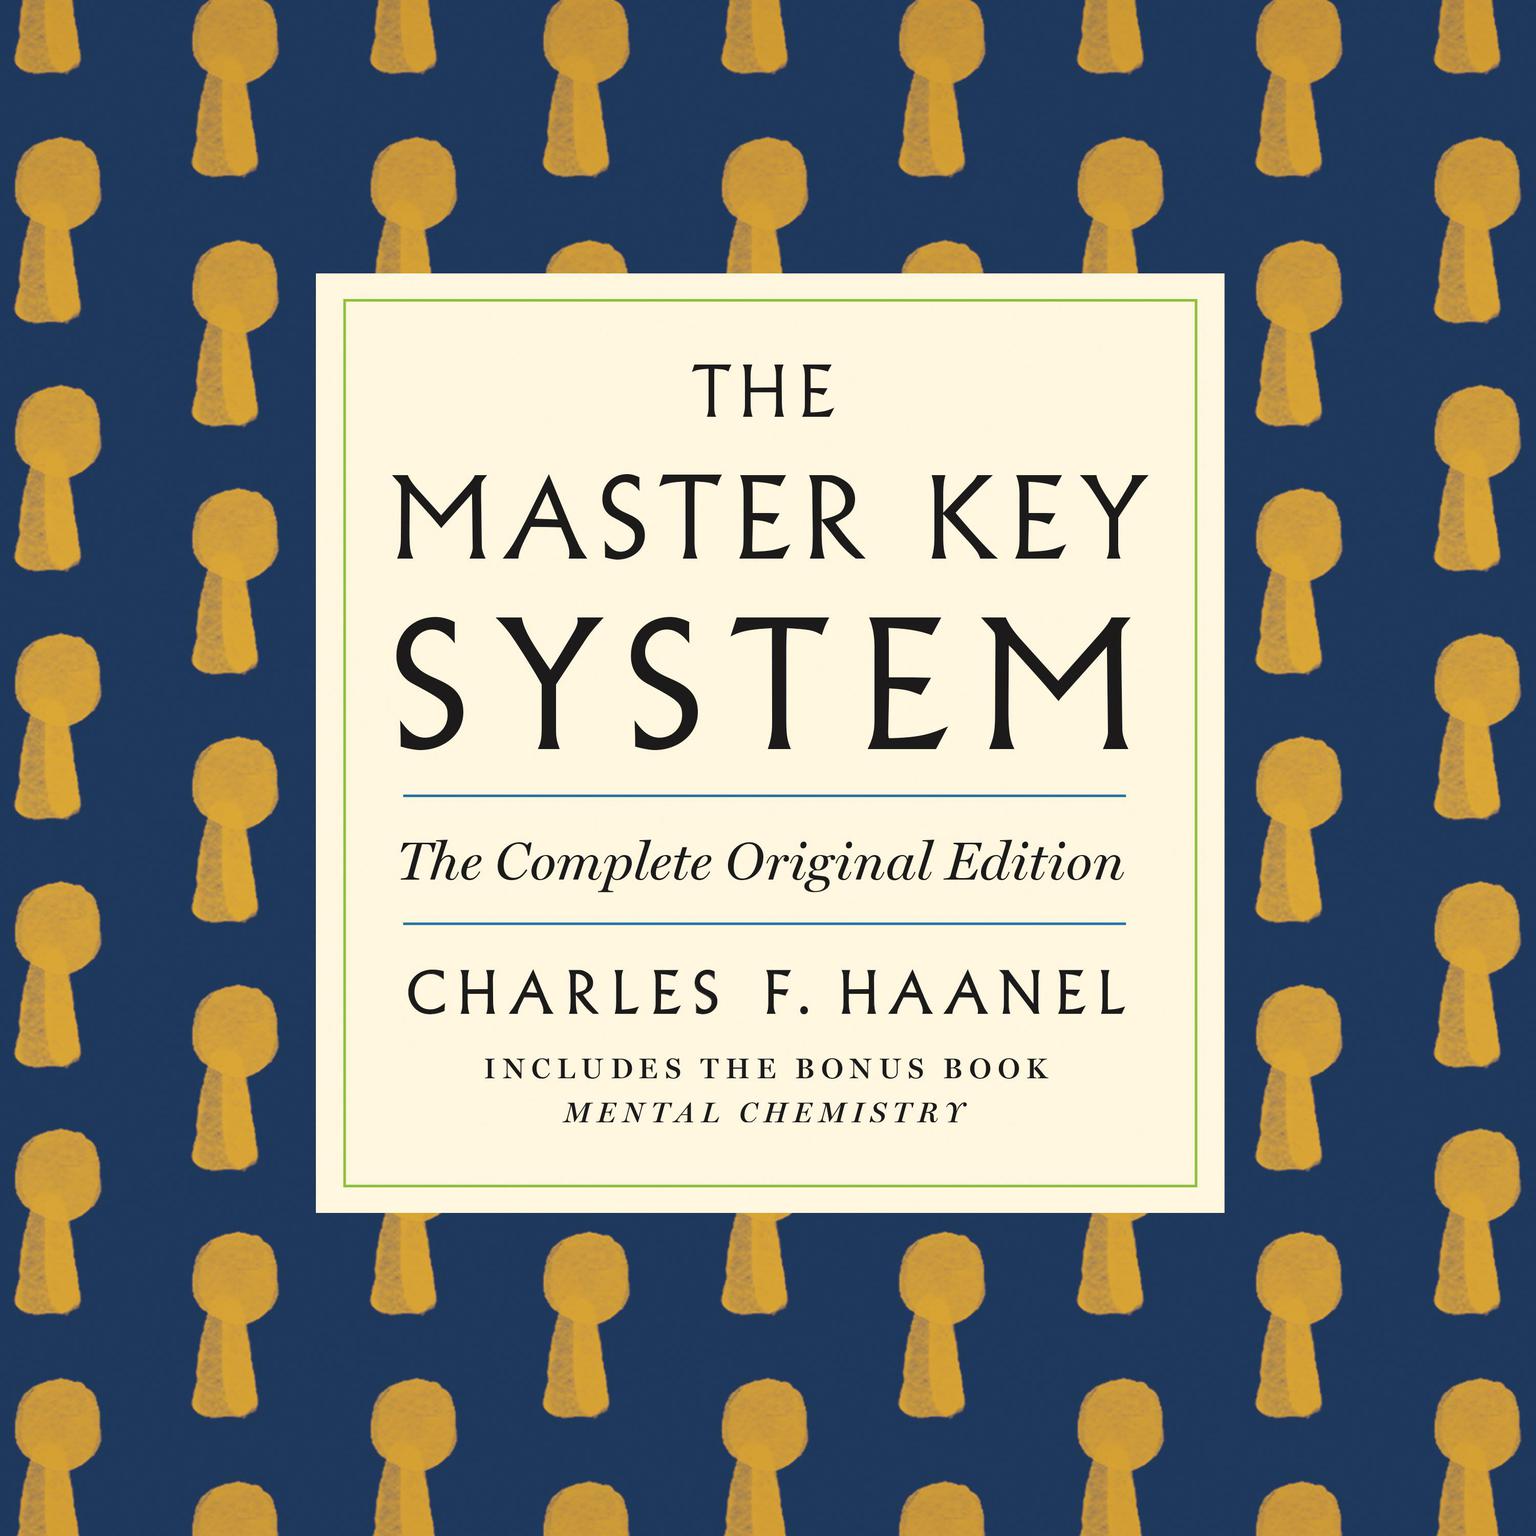 The Master Key System: The Complete Original Edition: Also Includes the Bonus Book Mental Chemistry (GPS Guides to Life) Audiobook, by Charles F. Haanel